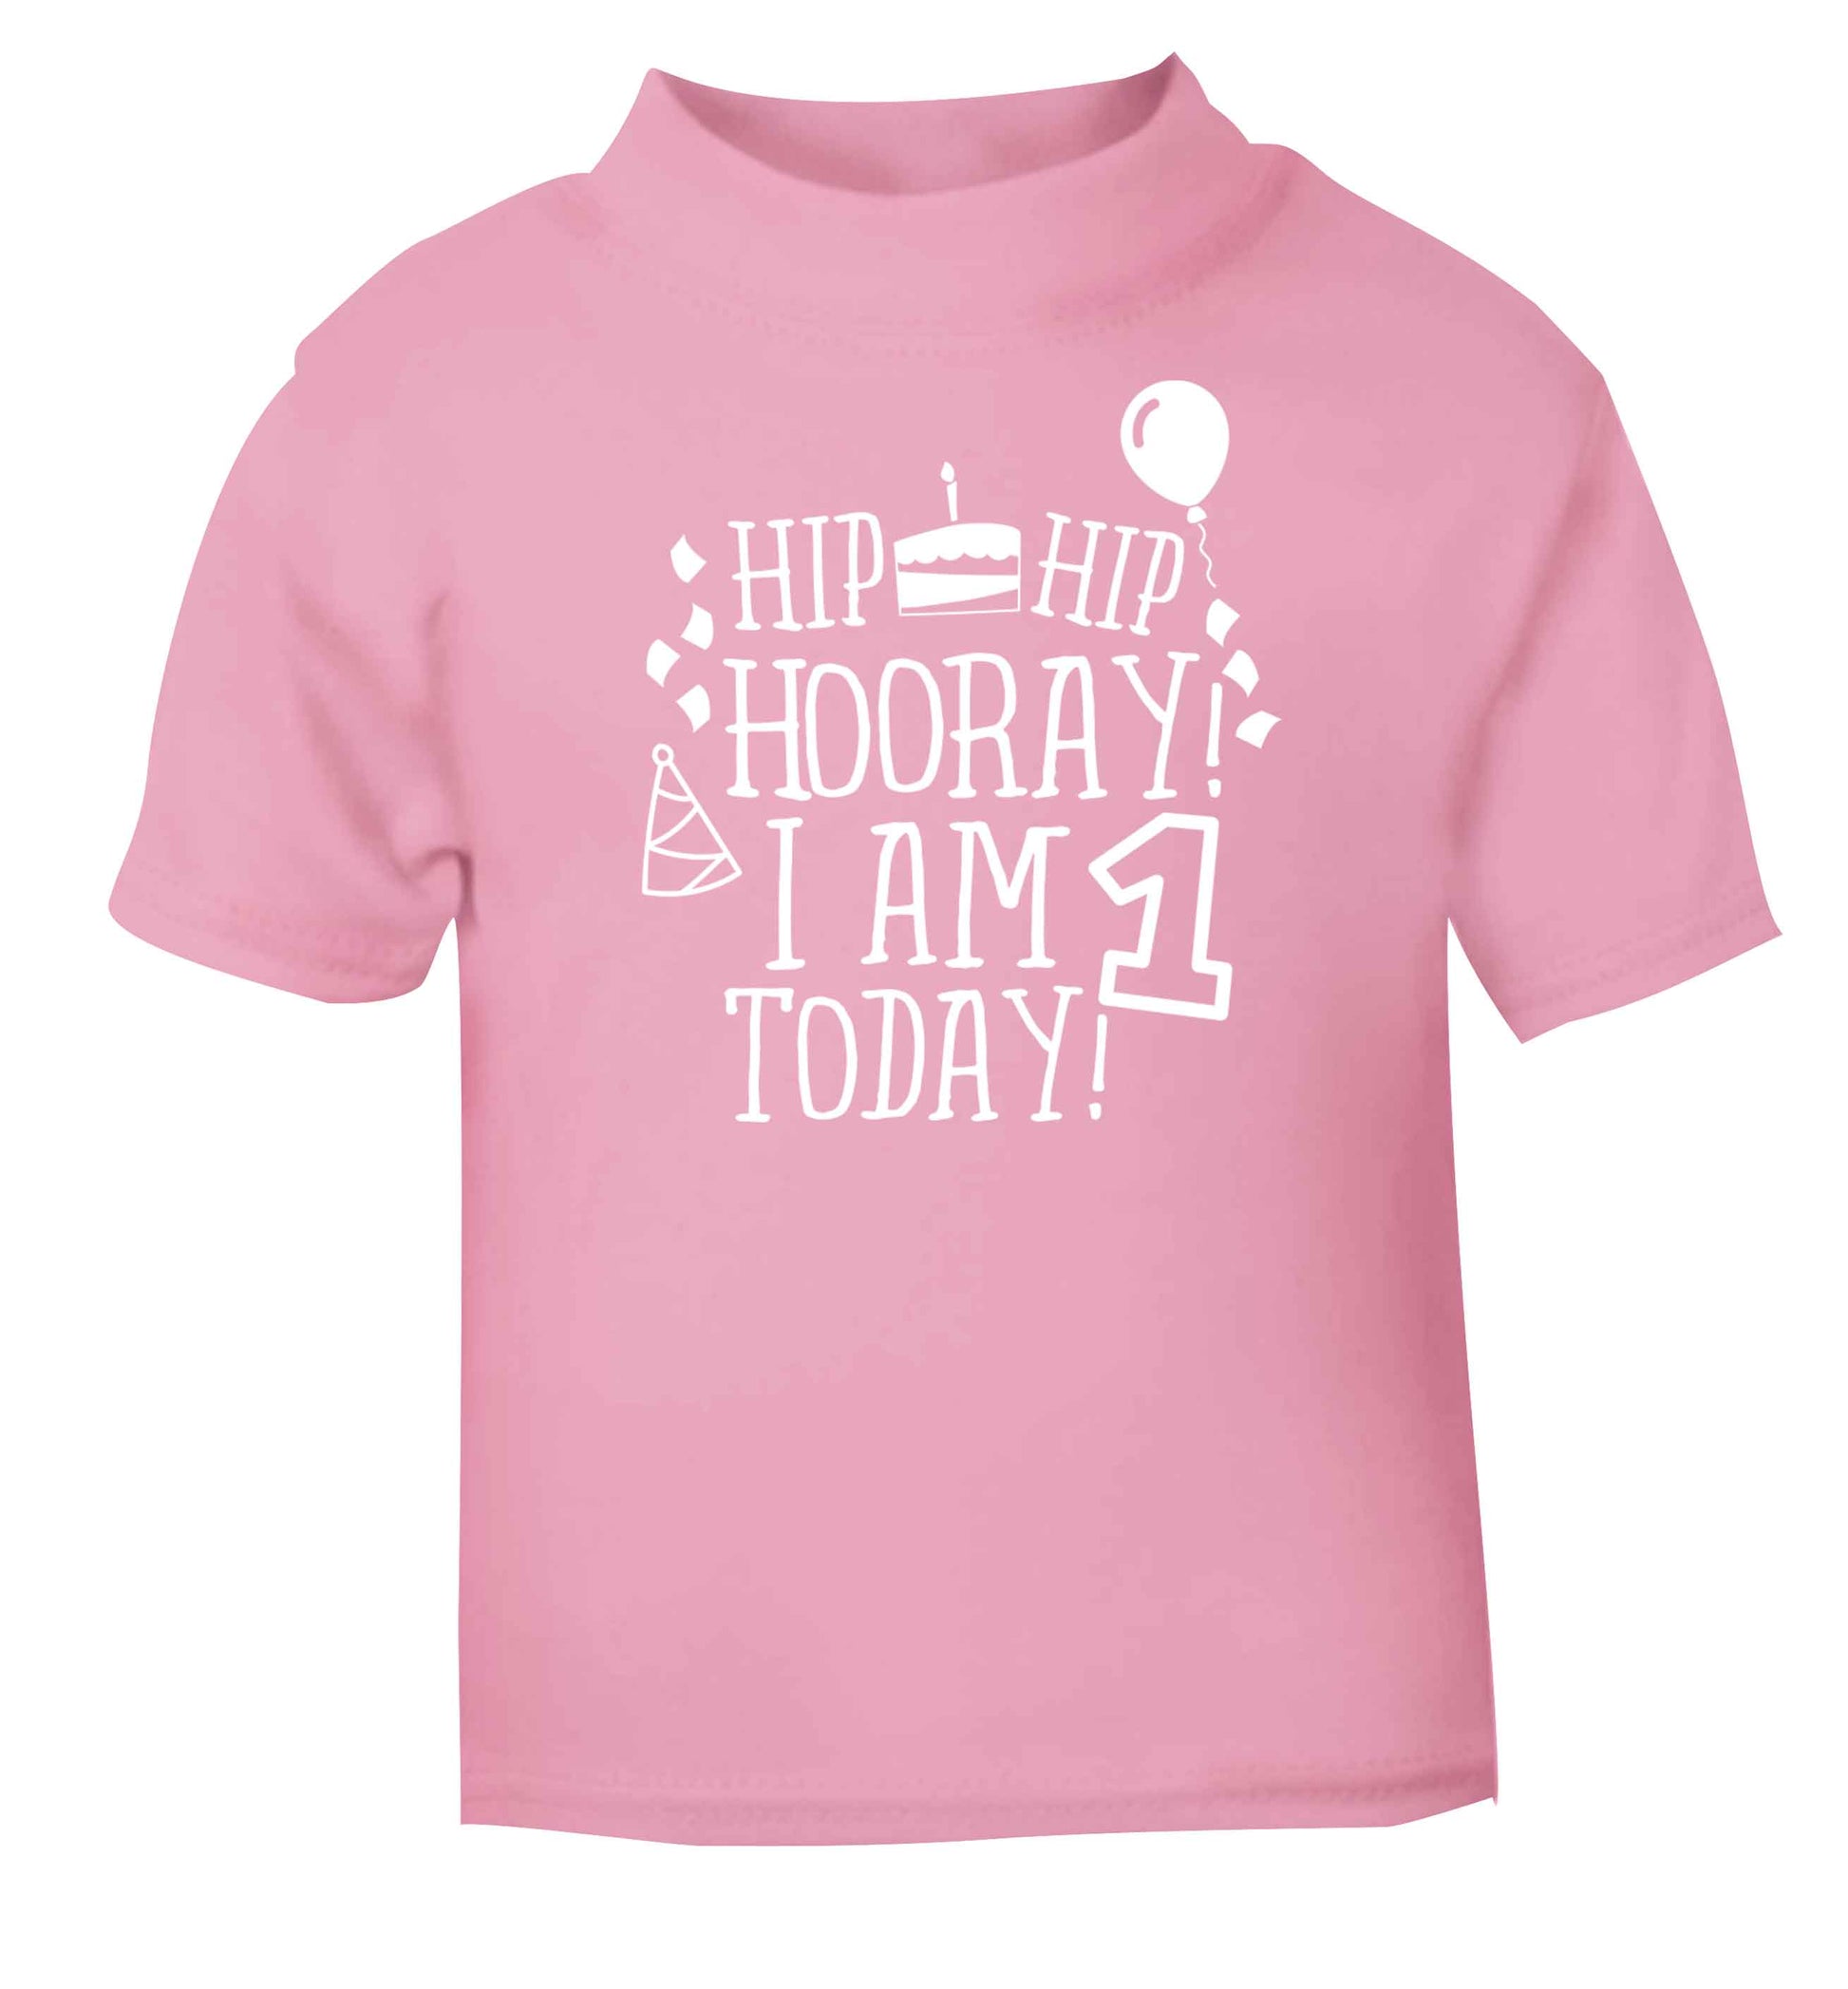 I am One Today light pink baby toddler Tshirt 2 Years